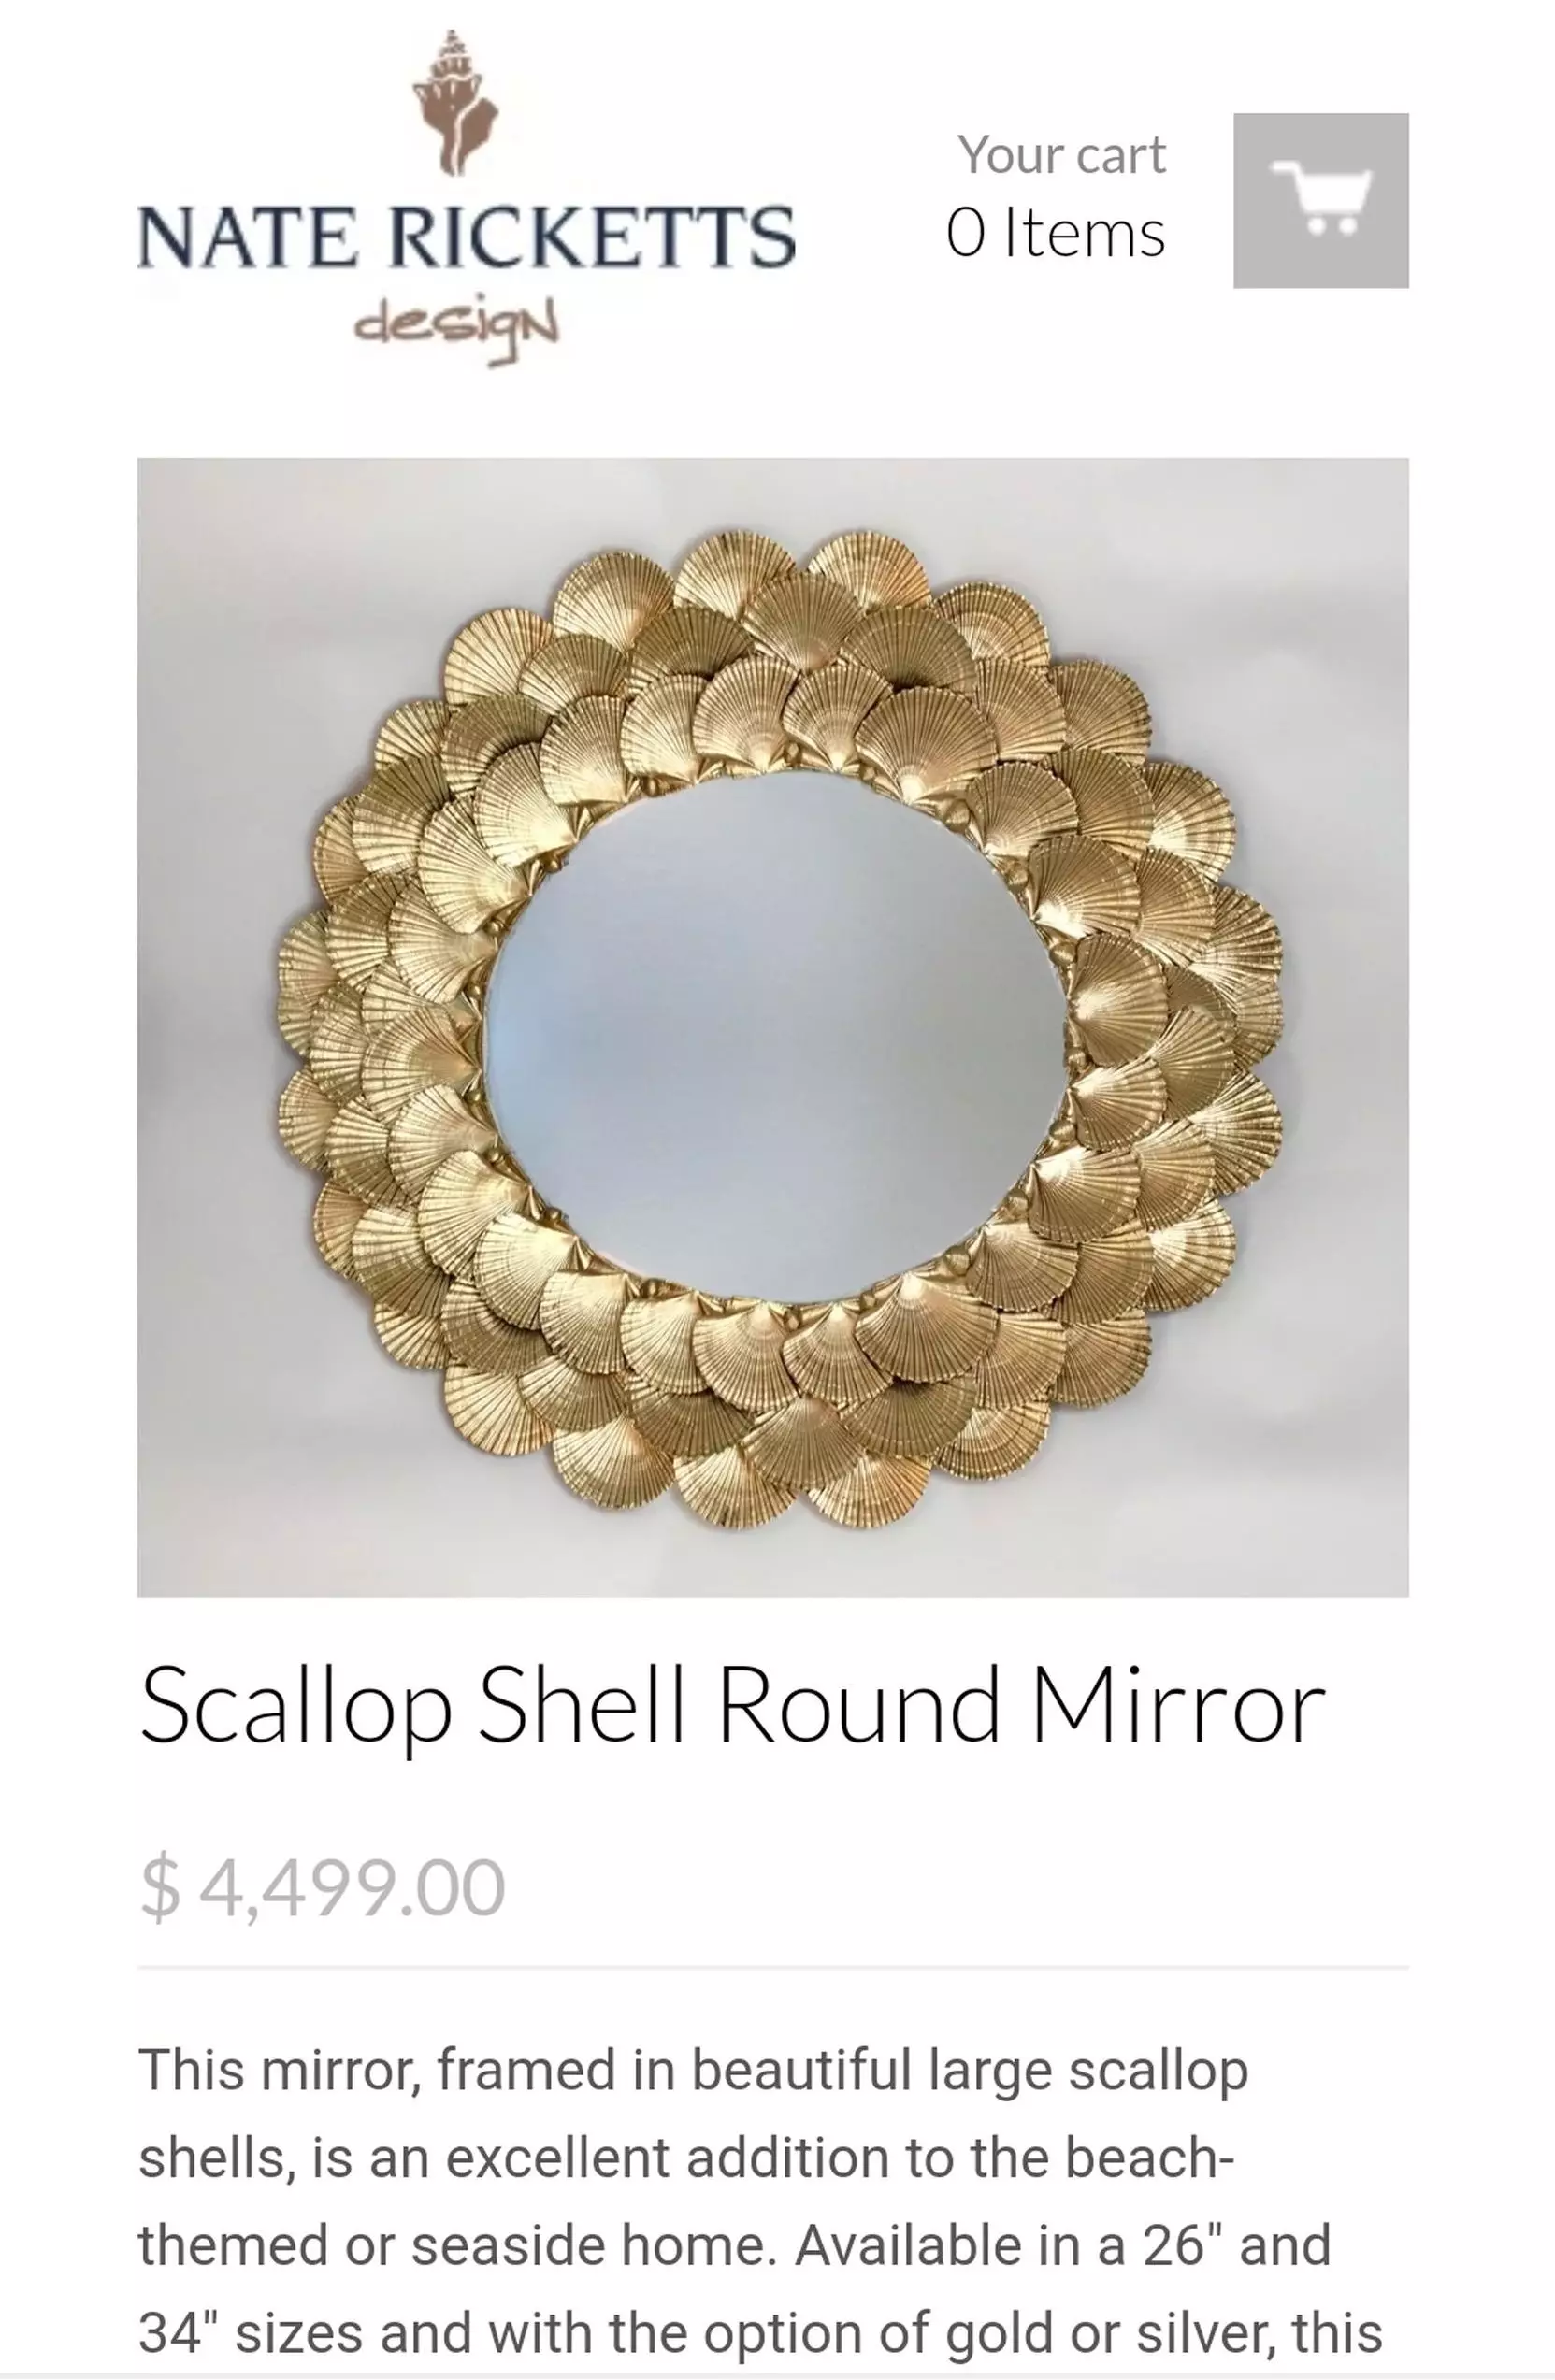 The original Scallop Shell Round Mirror designed by Nate Ricketts cost a hefty £3,572 ($4,499) (